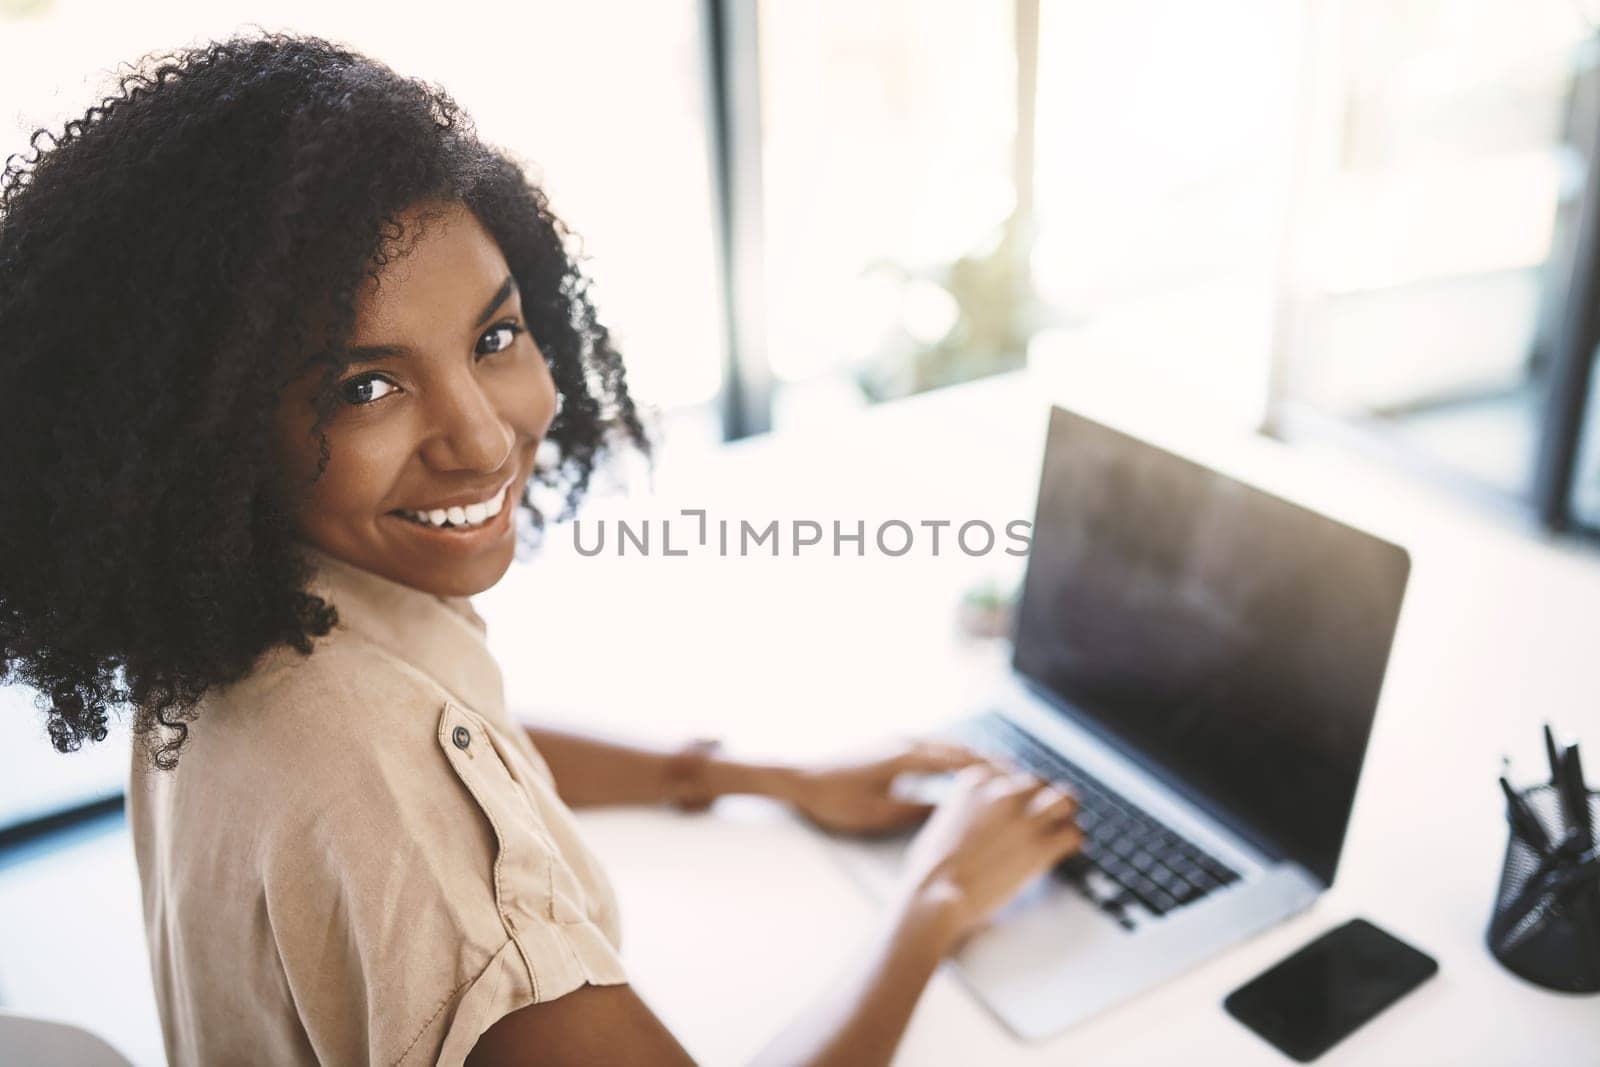 Passion makes all the difference. Portrait of a young businesswoman using a laptop at her desk in a modern office